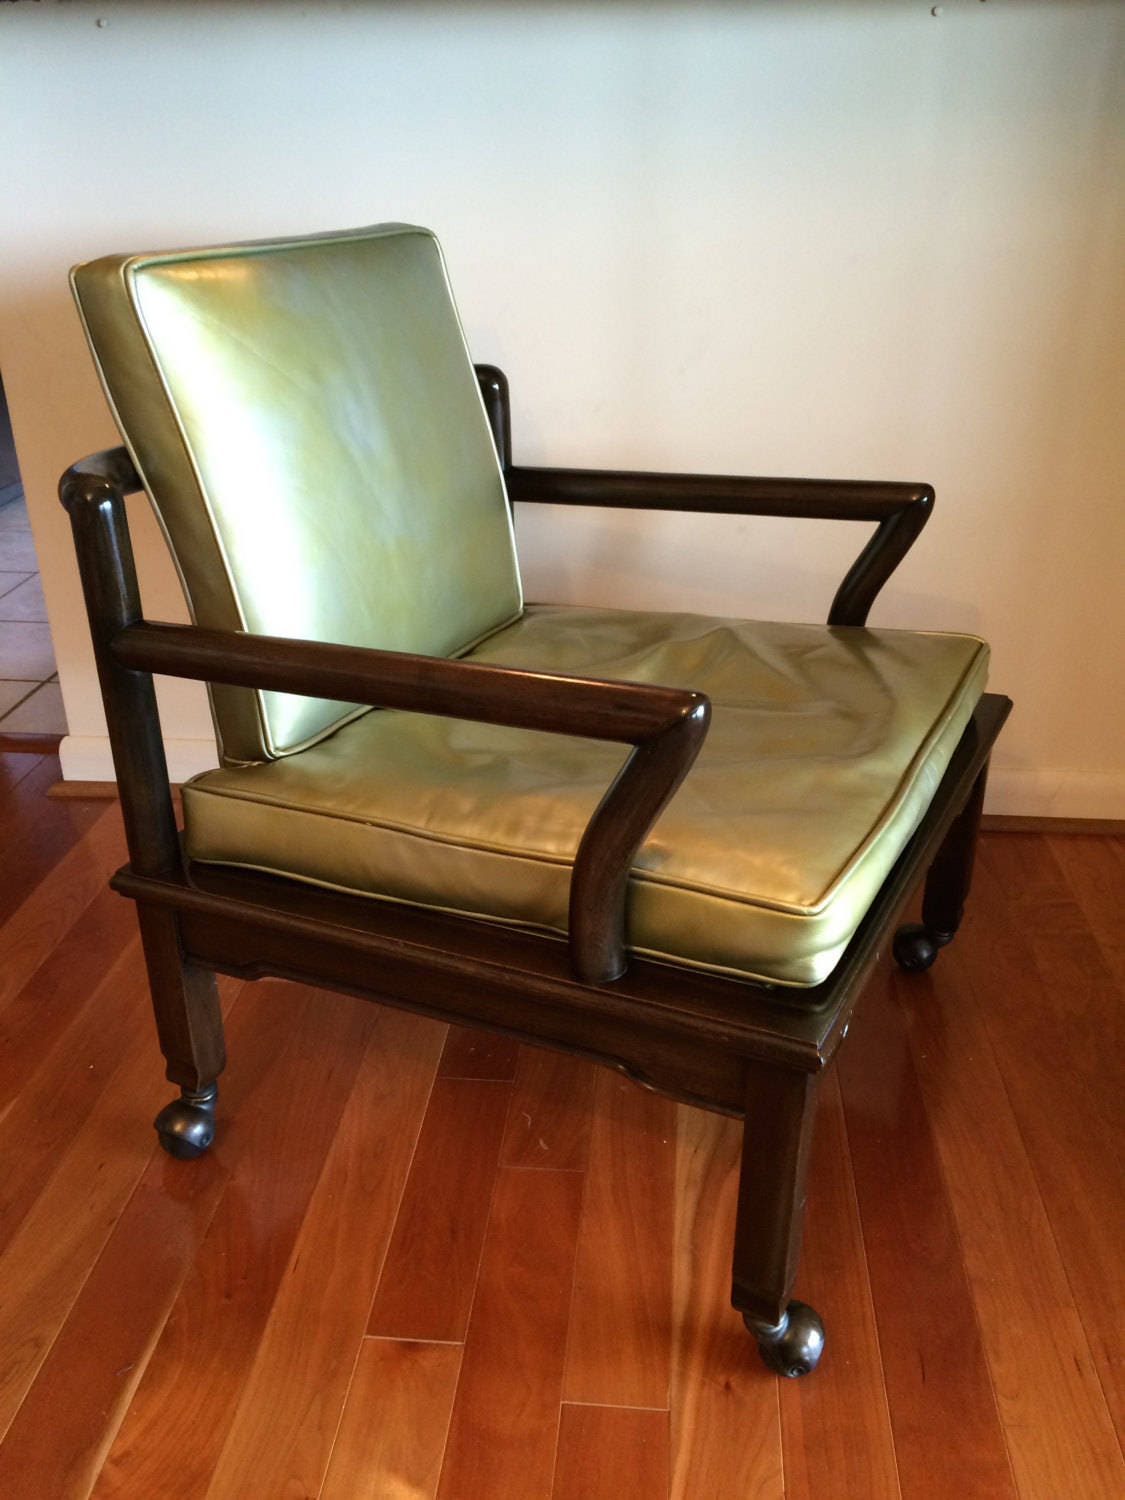 Set of 4 Leather Club Chairs | Widdicomb